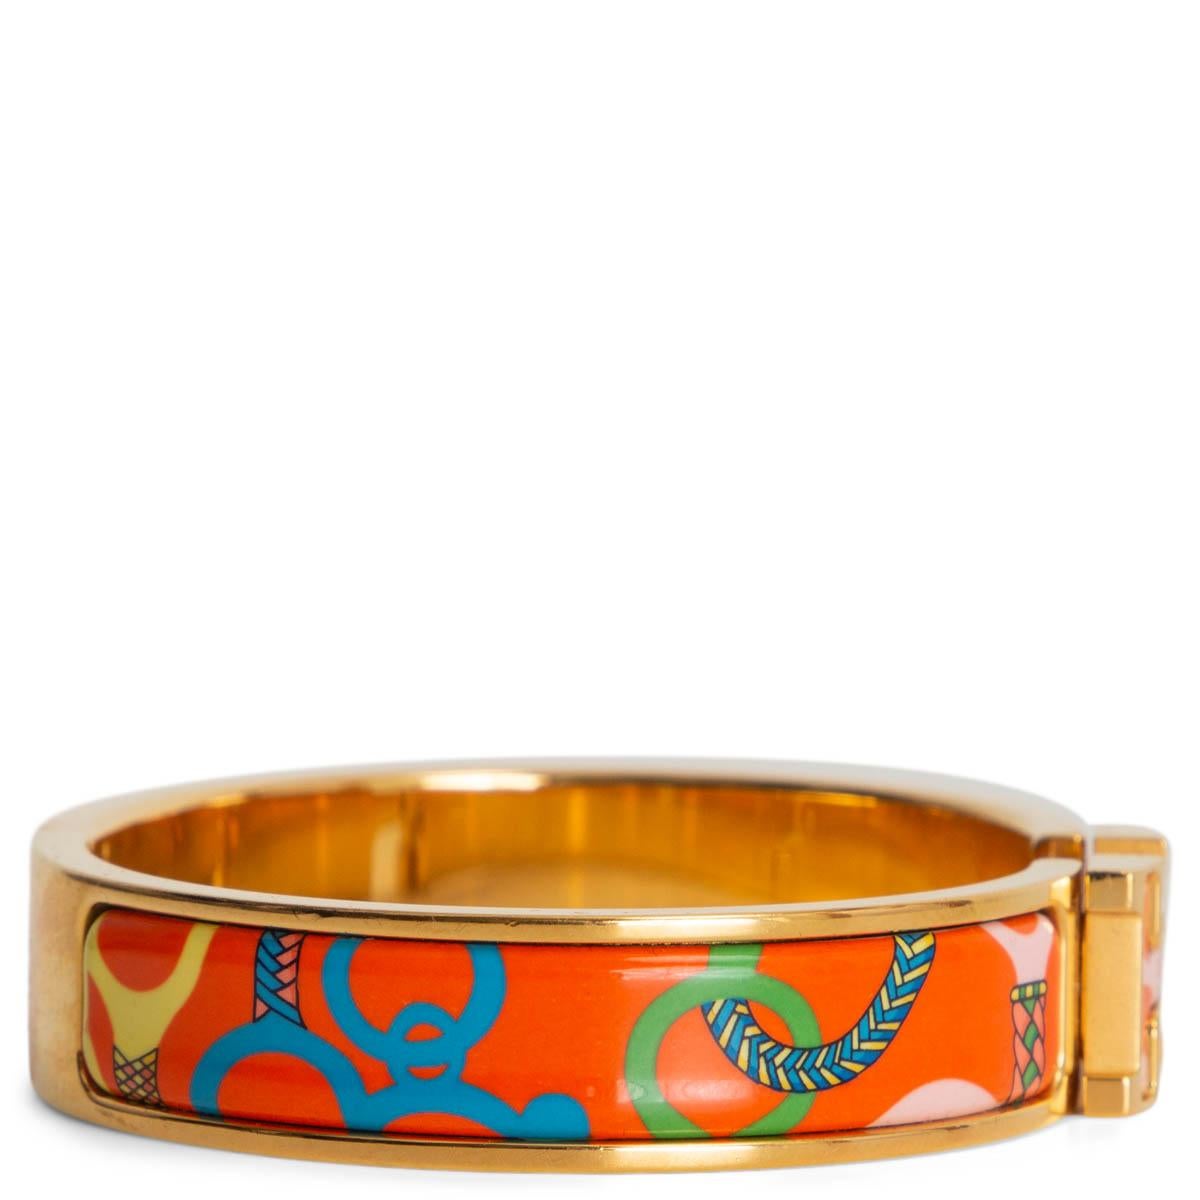 100% authentic Hermès Clic H PM bracelet in orange and multicolor Panoplie Equestre printed enamel and gold-plated hardware. Has been worn and is in excellent condition. Comes with dust bag. 

Measurements
Size	PM
Height	1.2cm (0.5in)
Depth	0.4cm